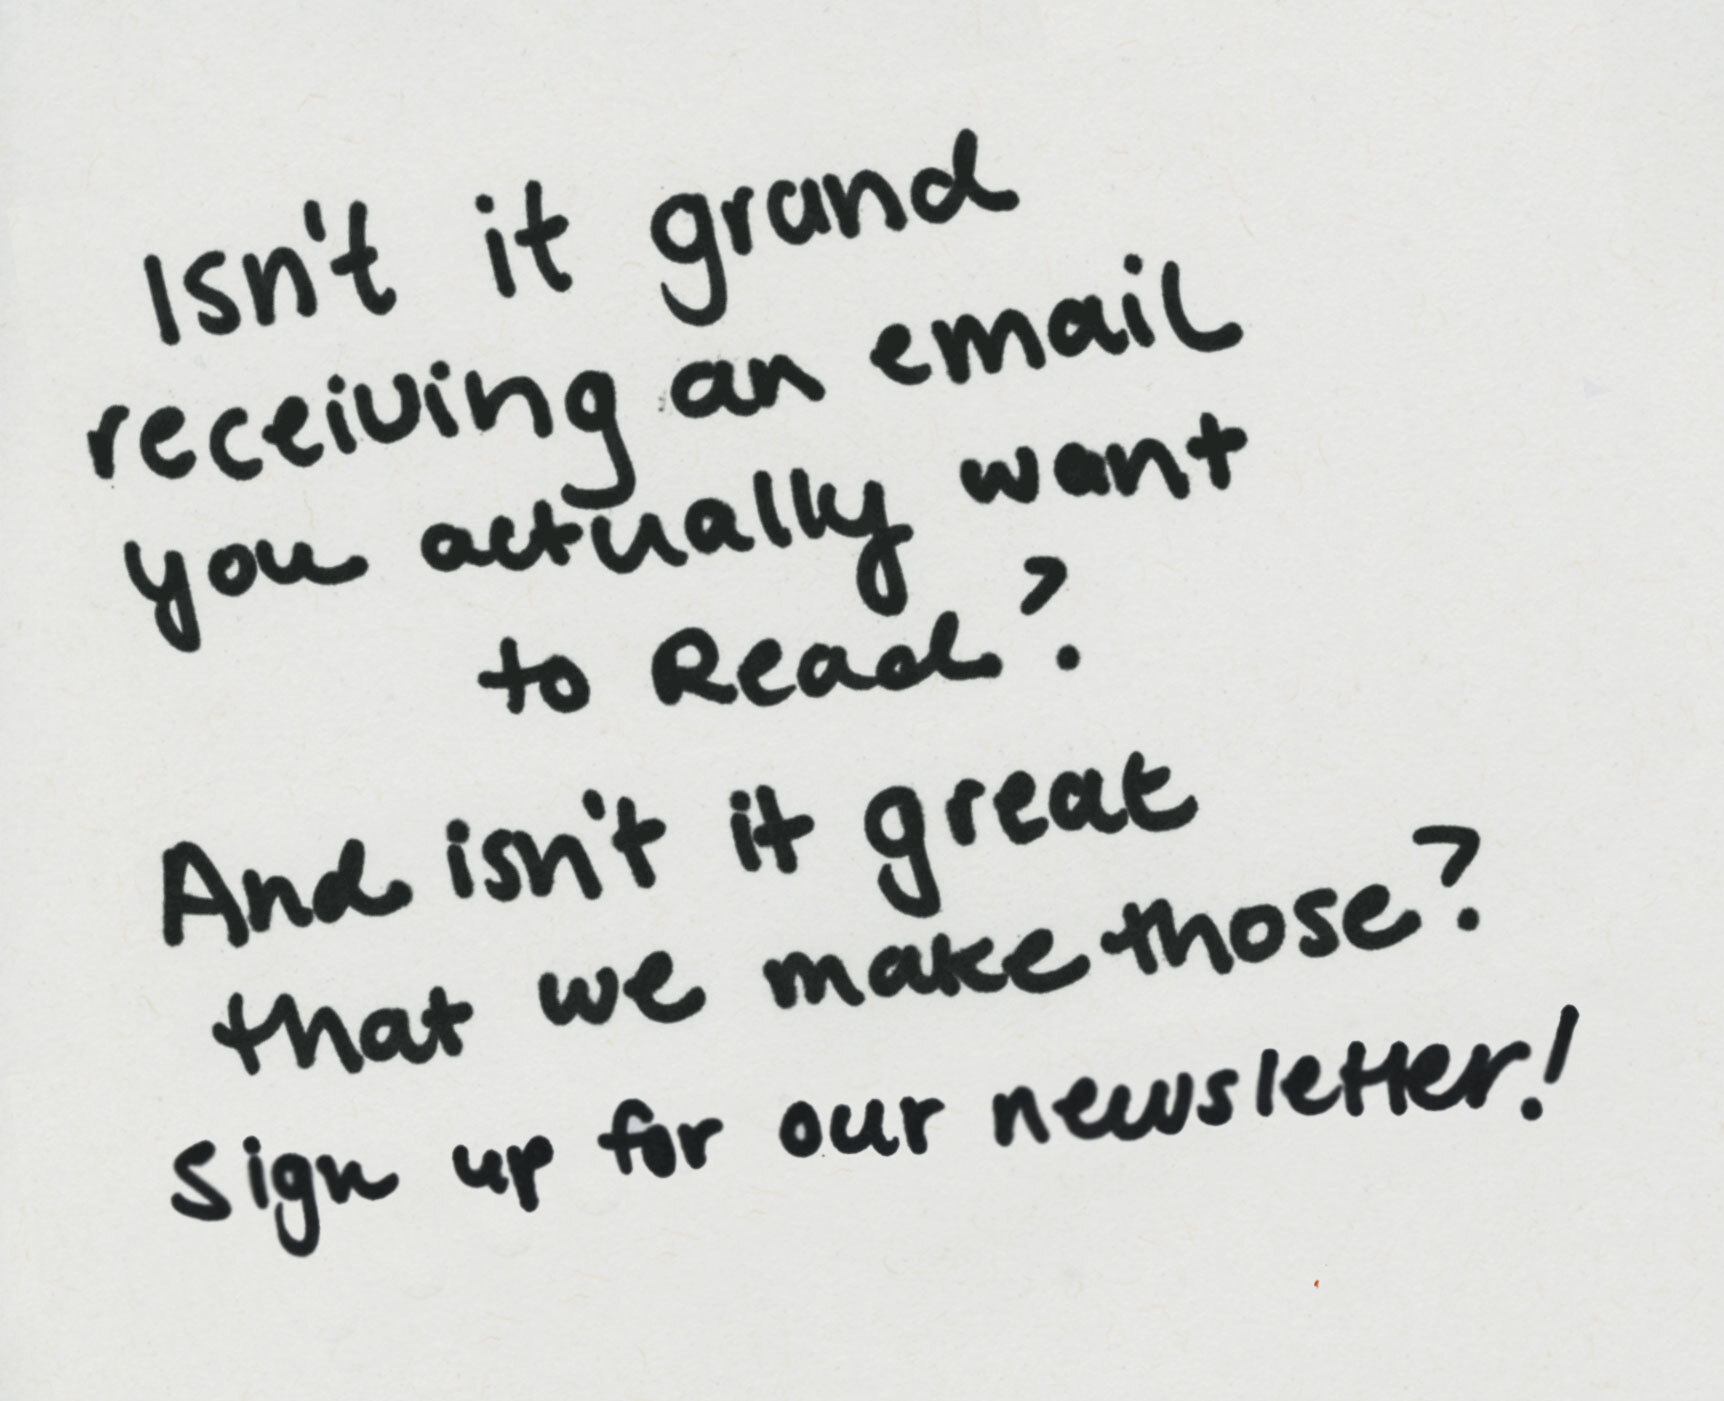 handwritten text that says: Isn't it grand receiving an email you actually want to read? And isn't it great that we make those? Sign up to receive them!